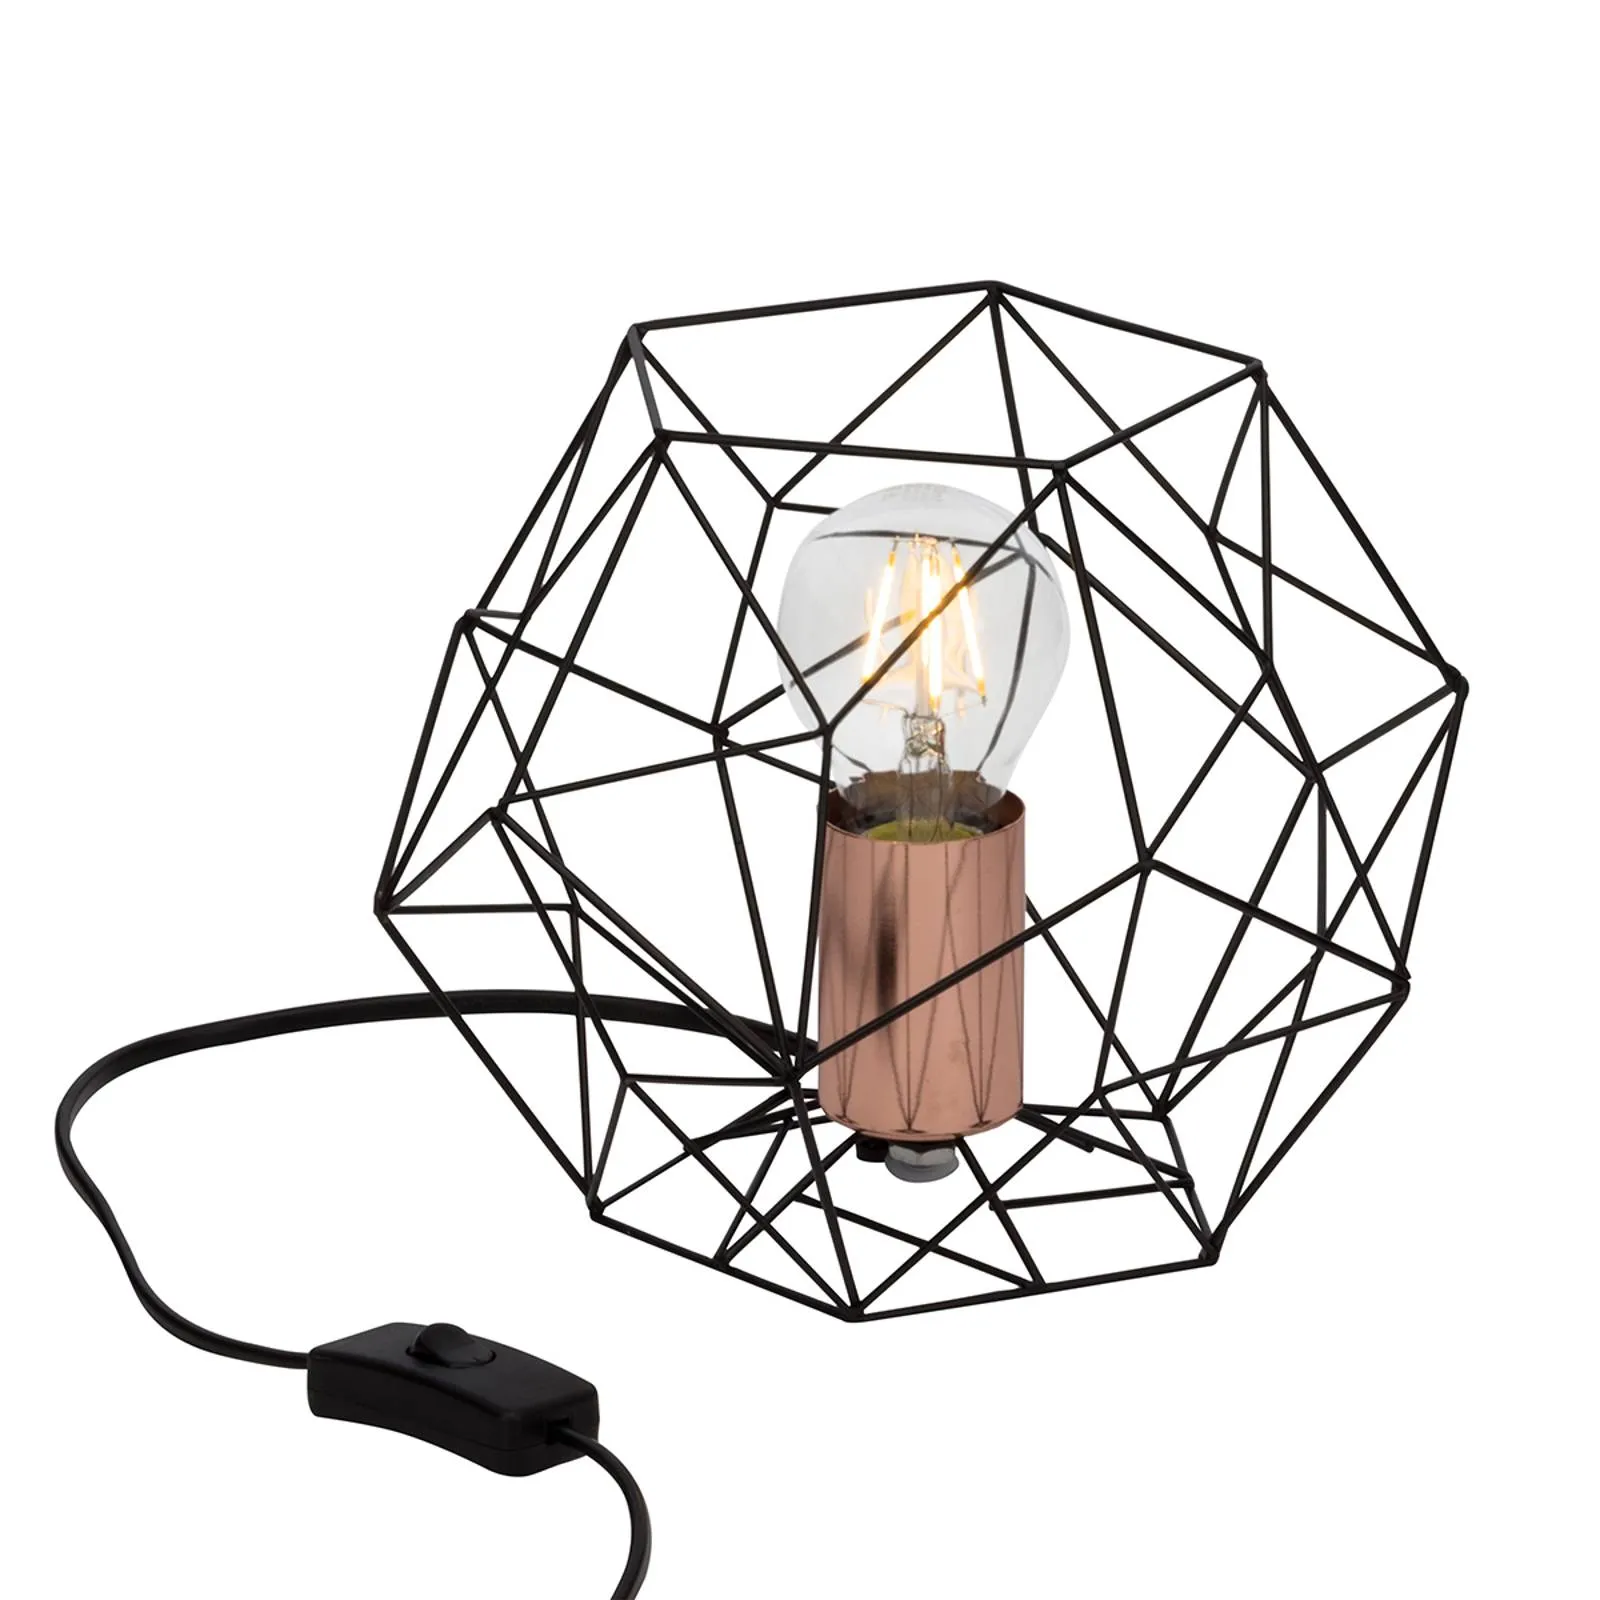 Synergy - table lamp with interesting design